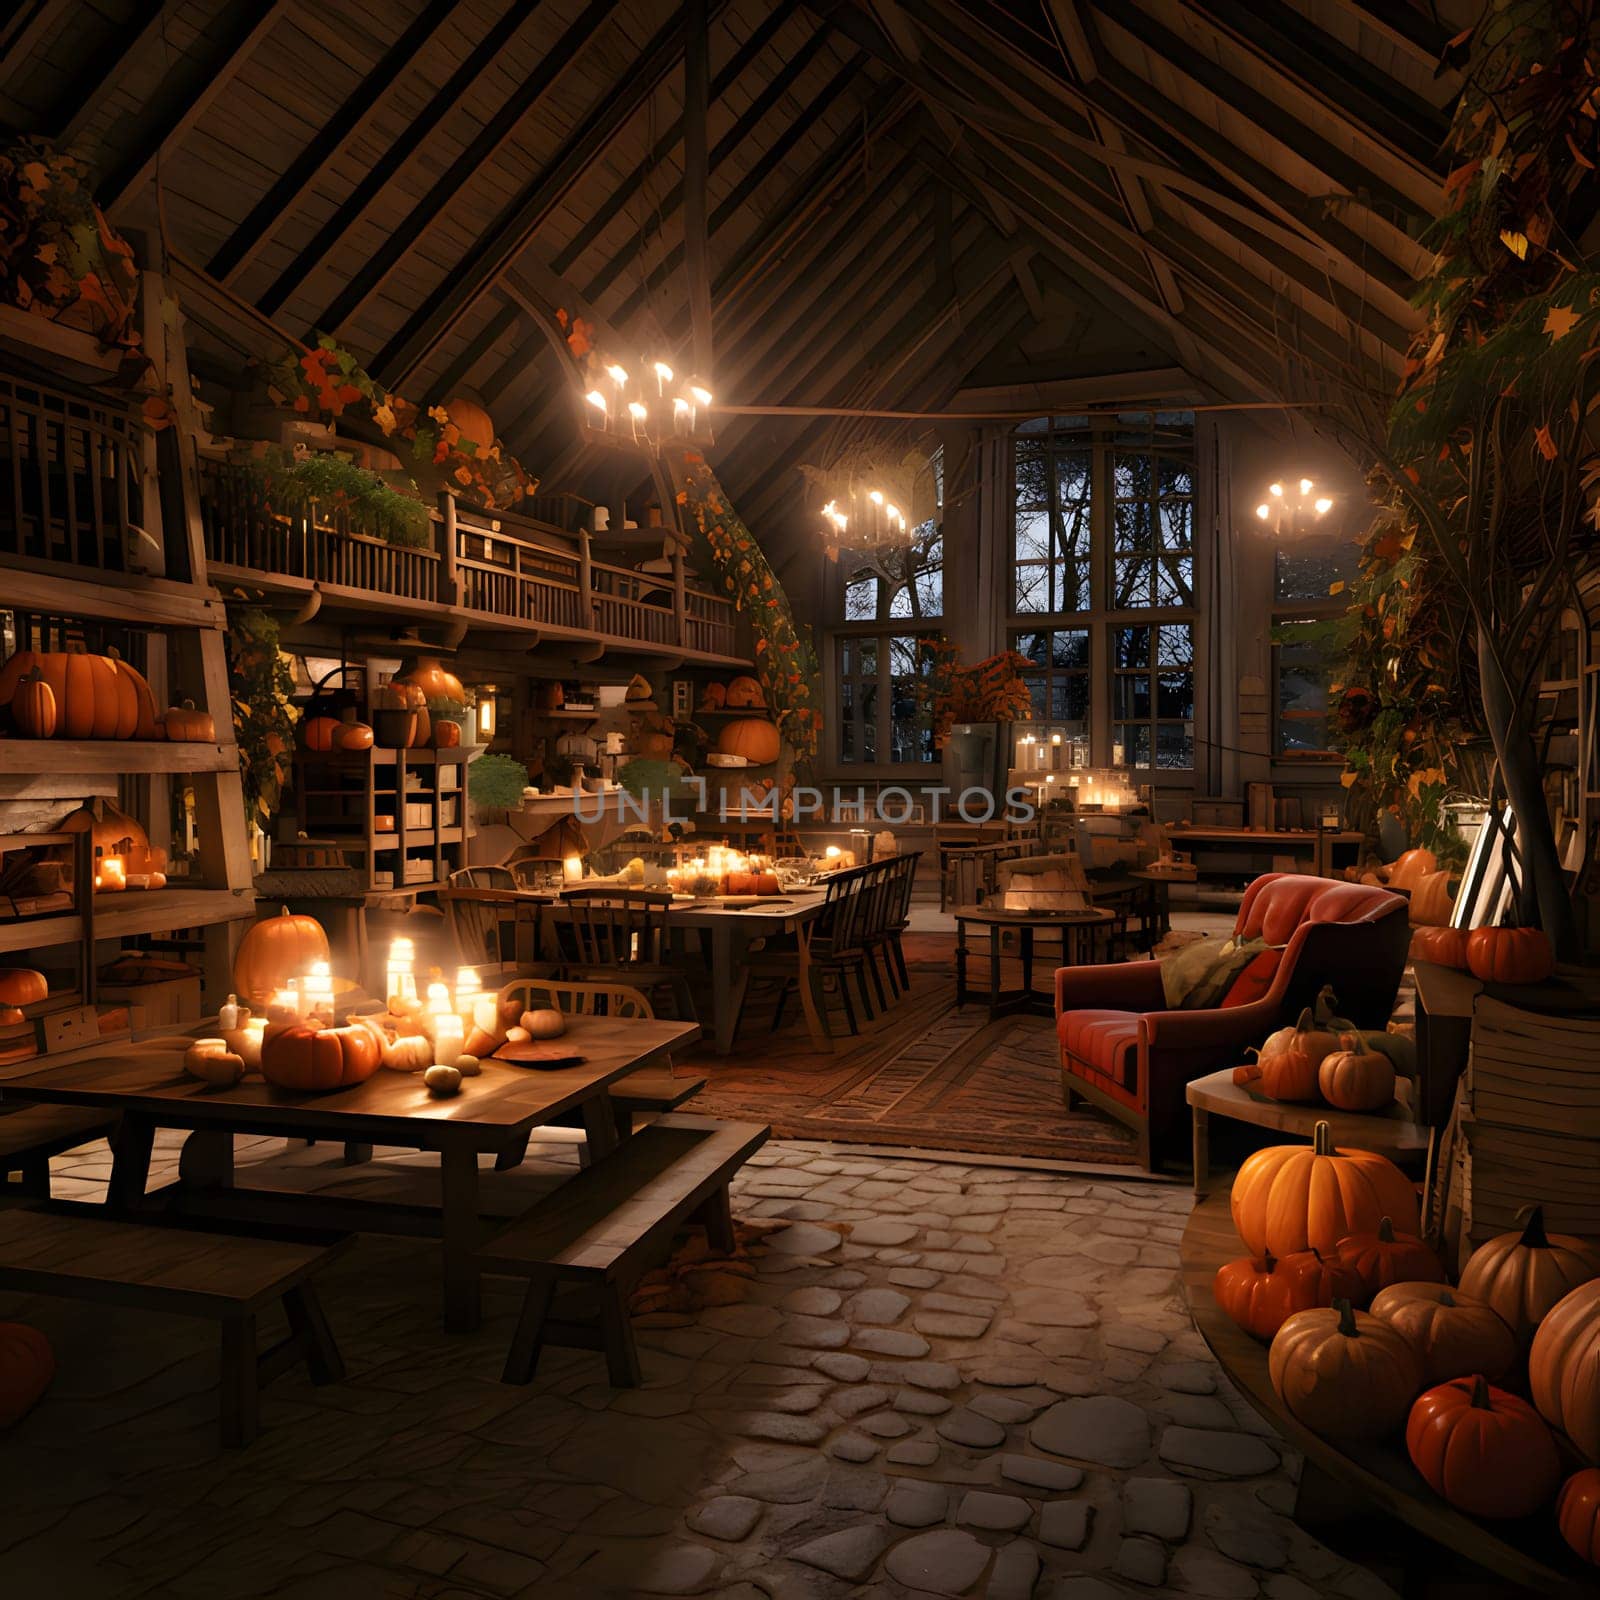 Wooden house Decorated with candles and pumpkins. Interior. Pumpkin as a dish of thanksgiving for the harvest. An atmosphere of joy and celebration.